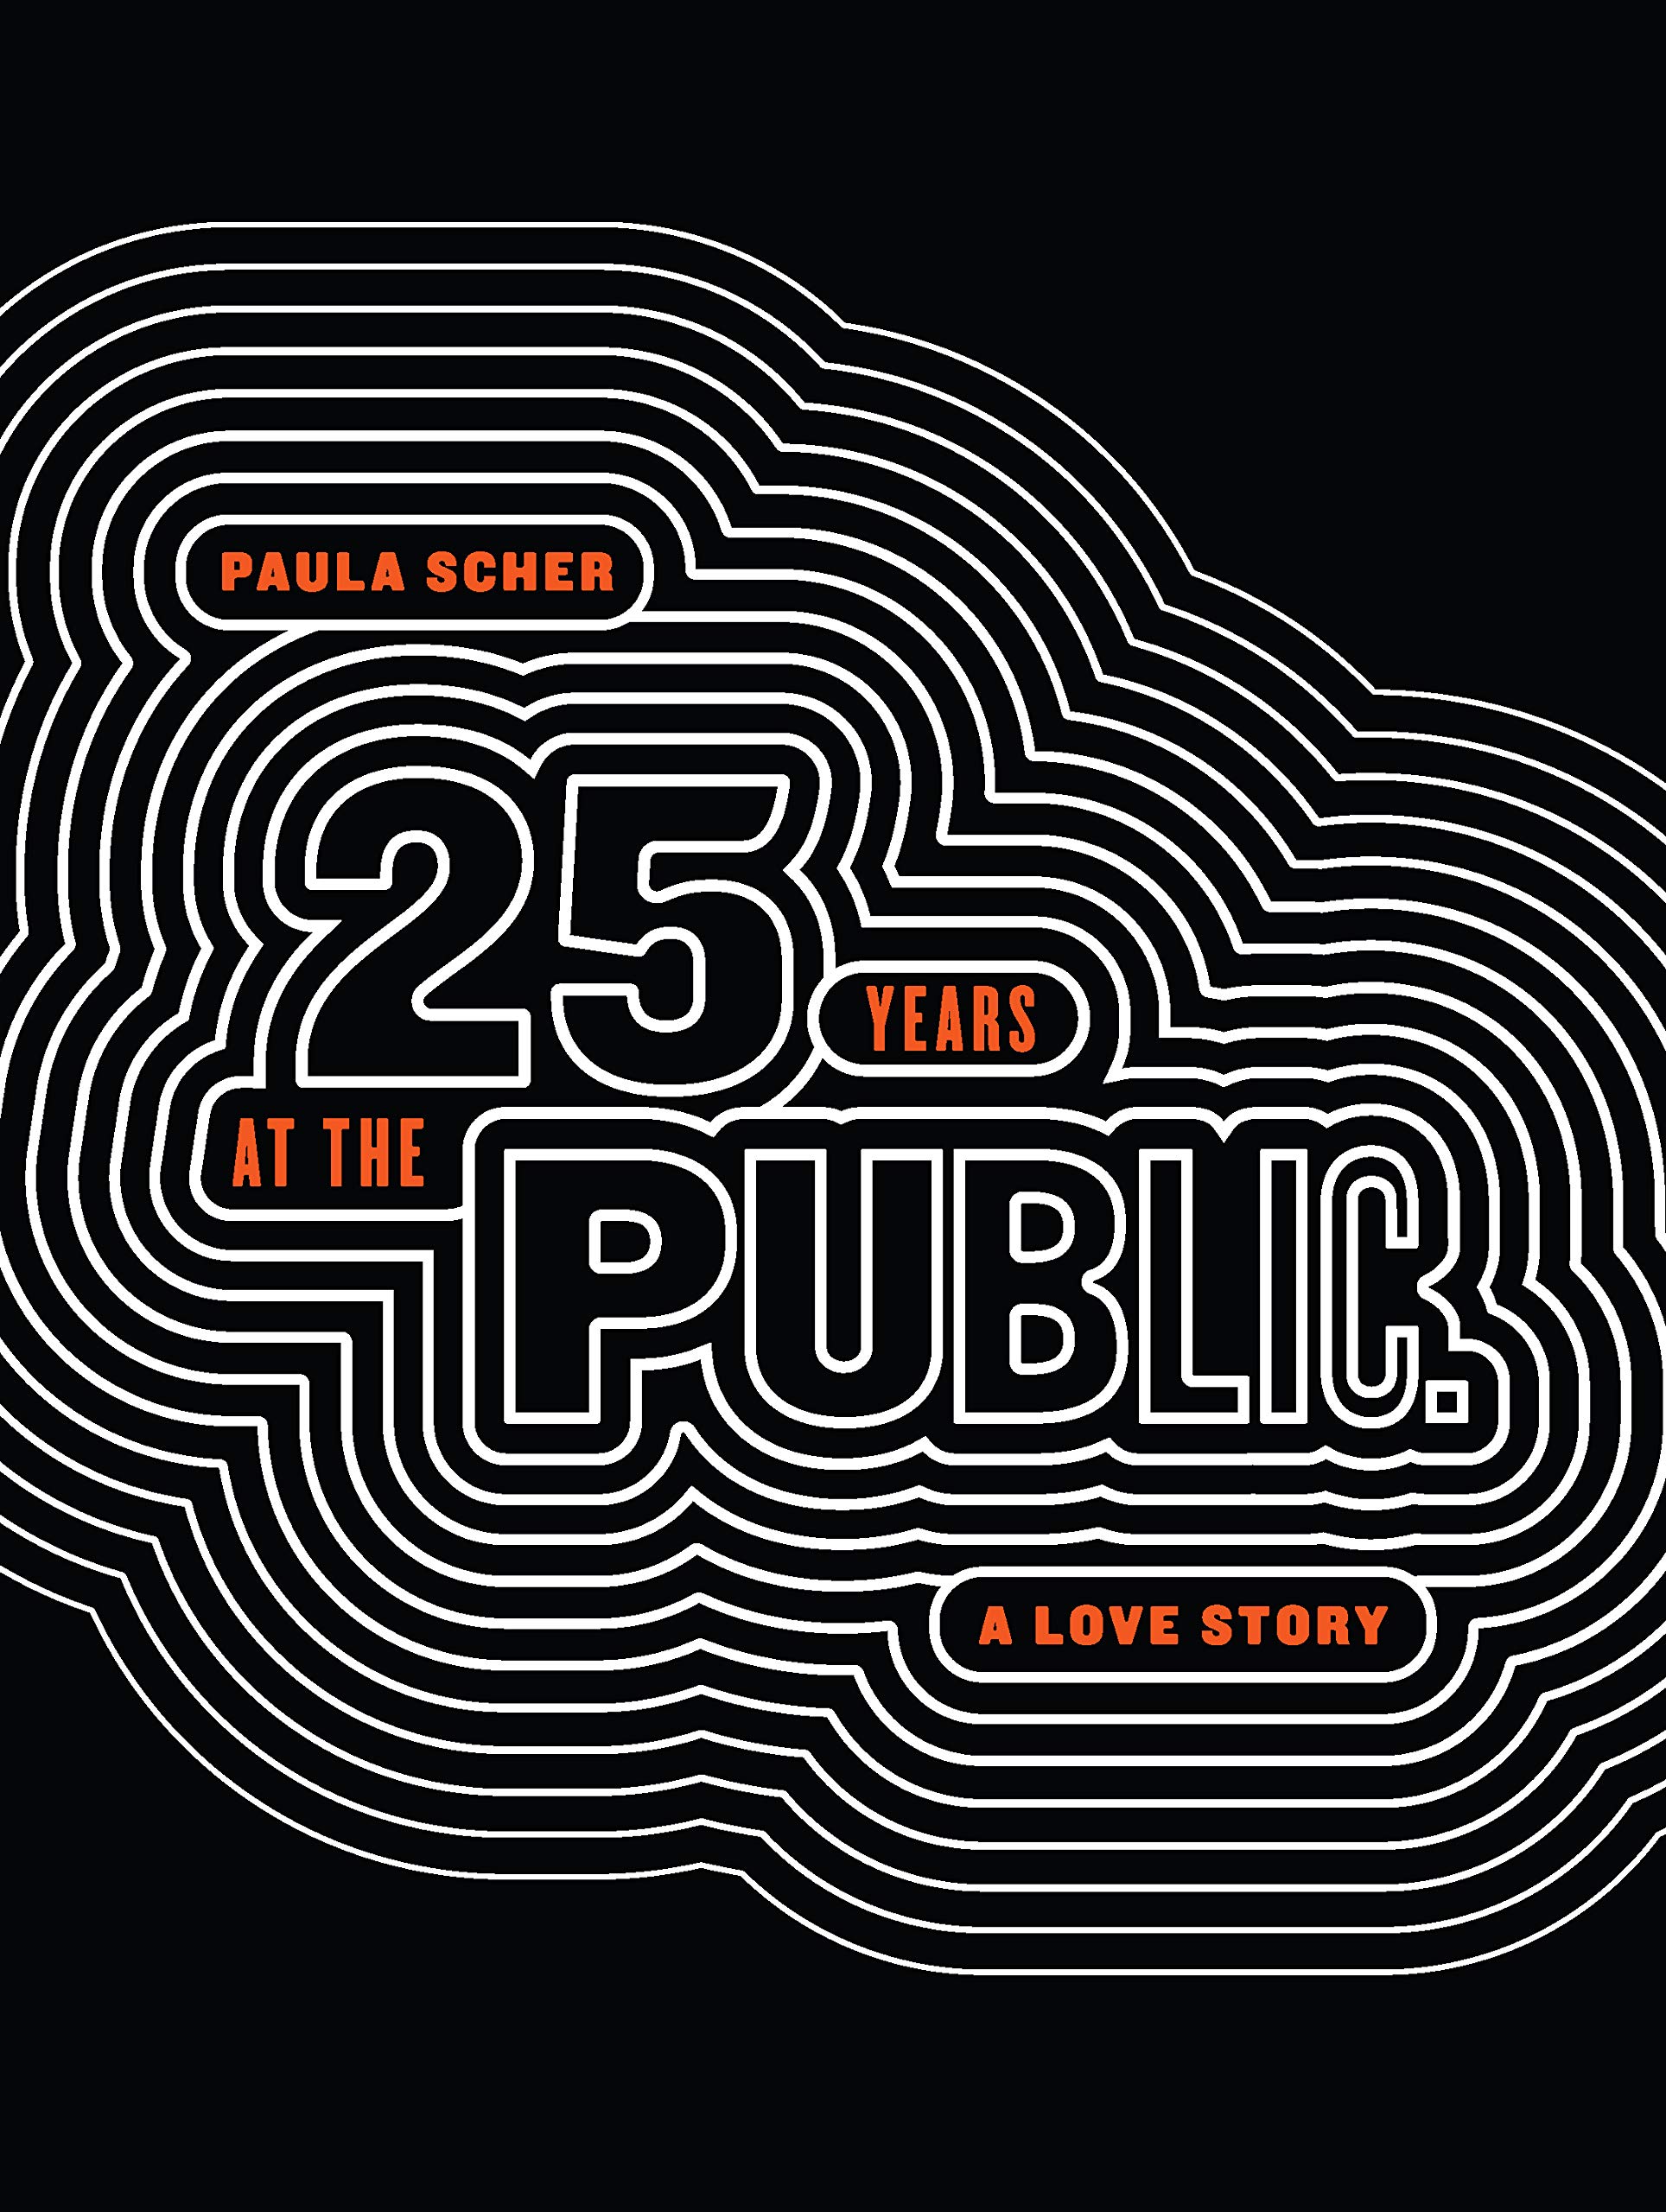 25 years at the Public